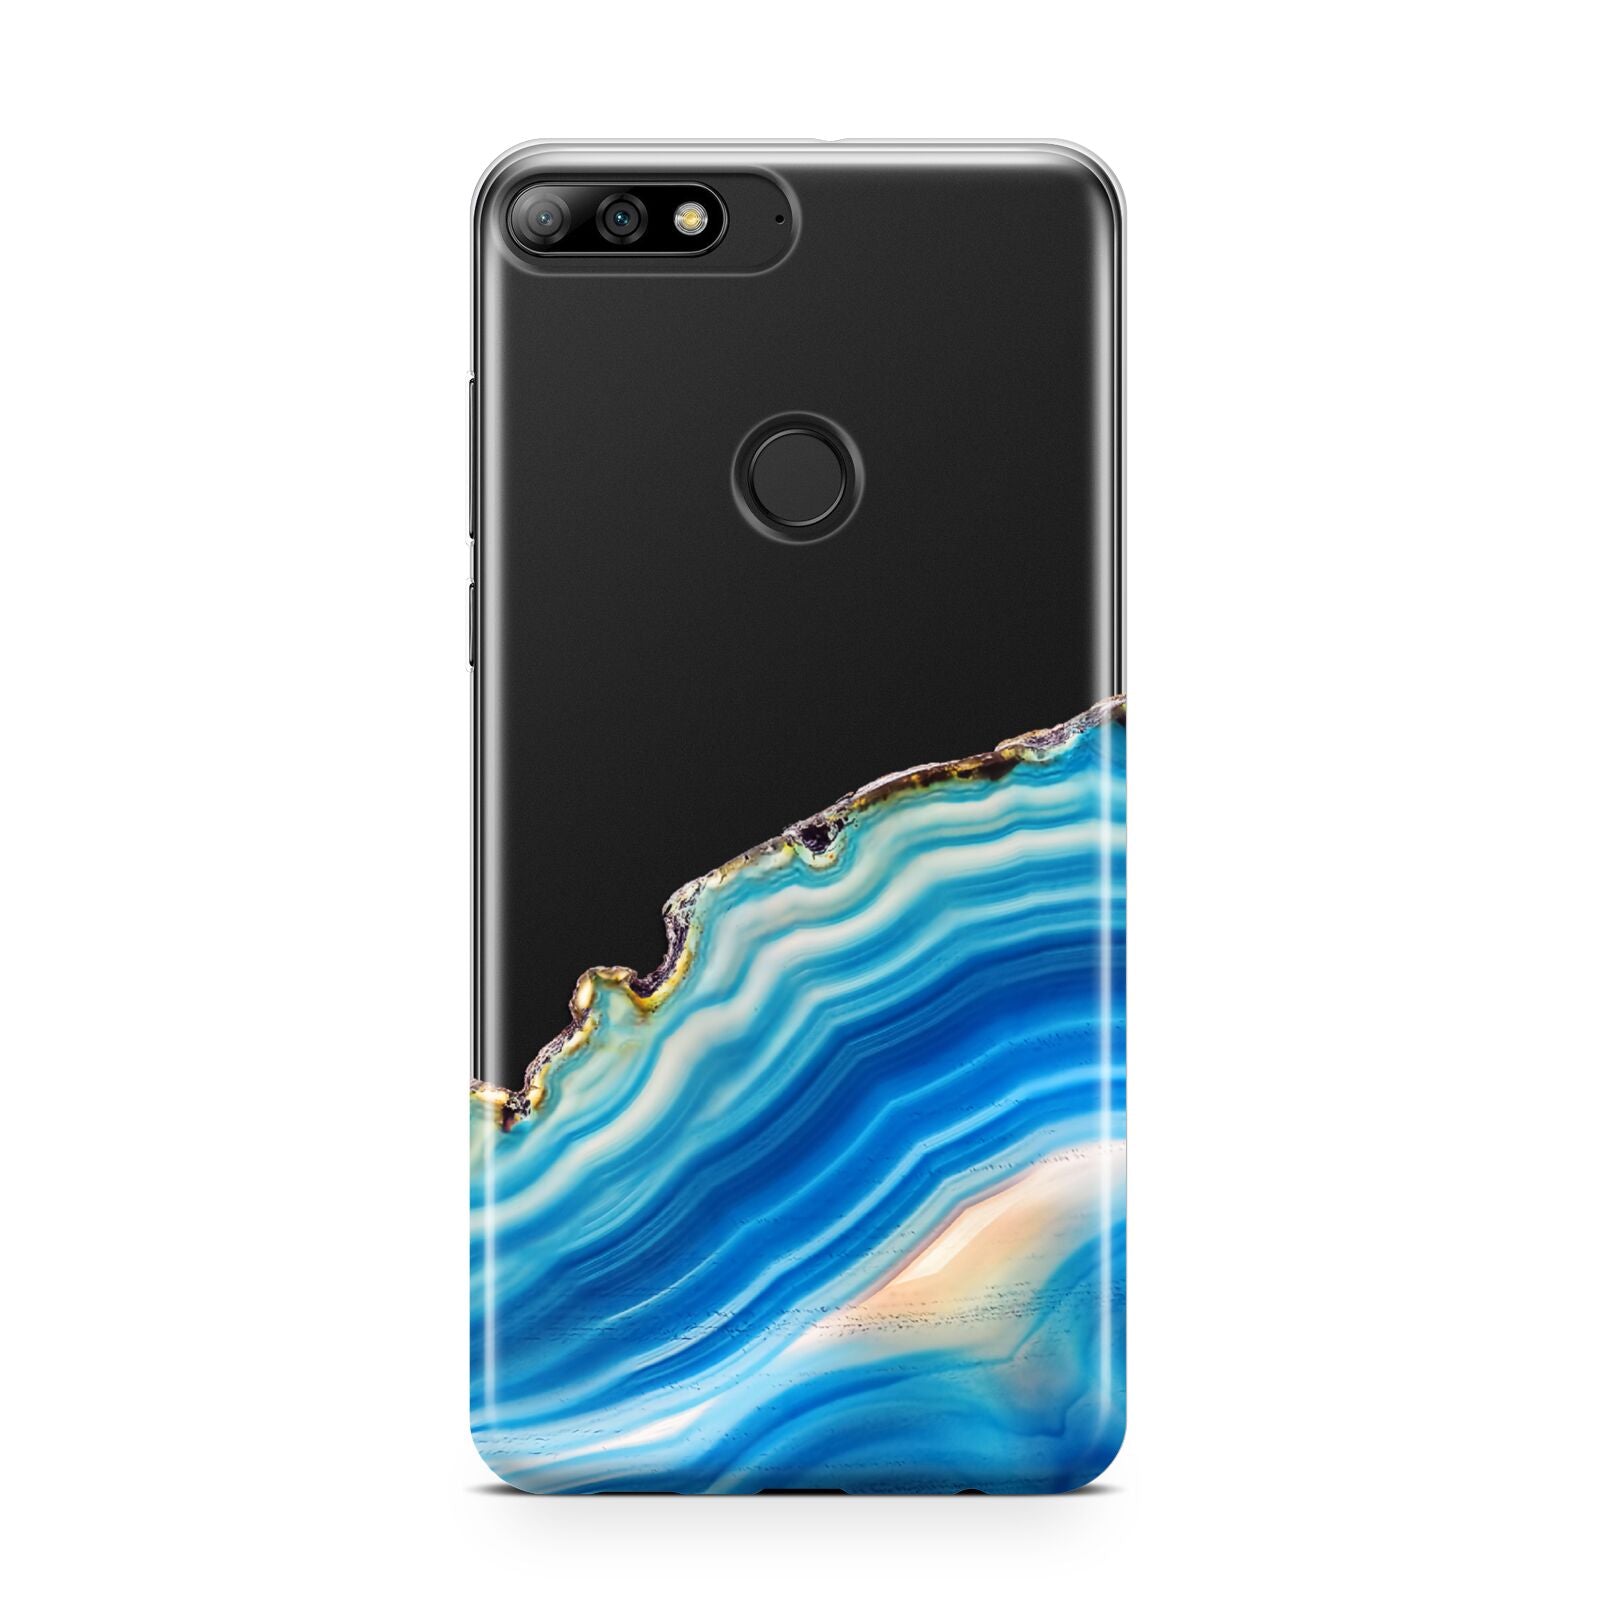 Agate Pale Blue and Bright Blue Huawei Y7 2018